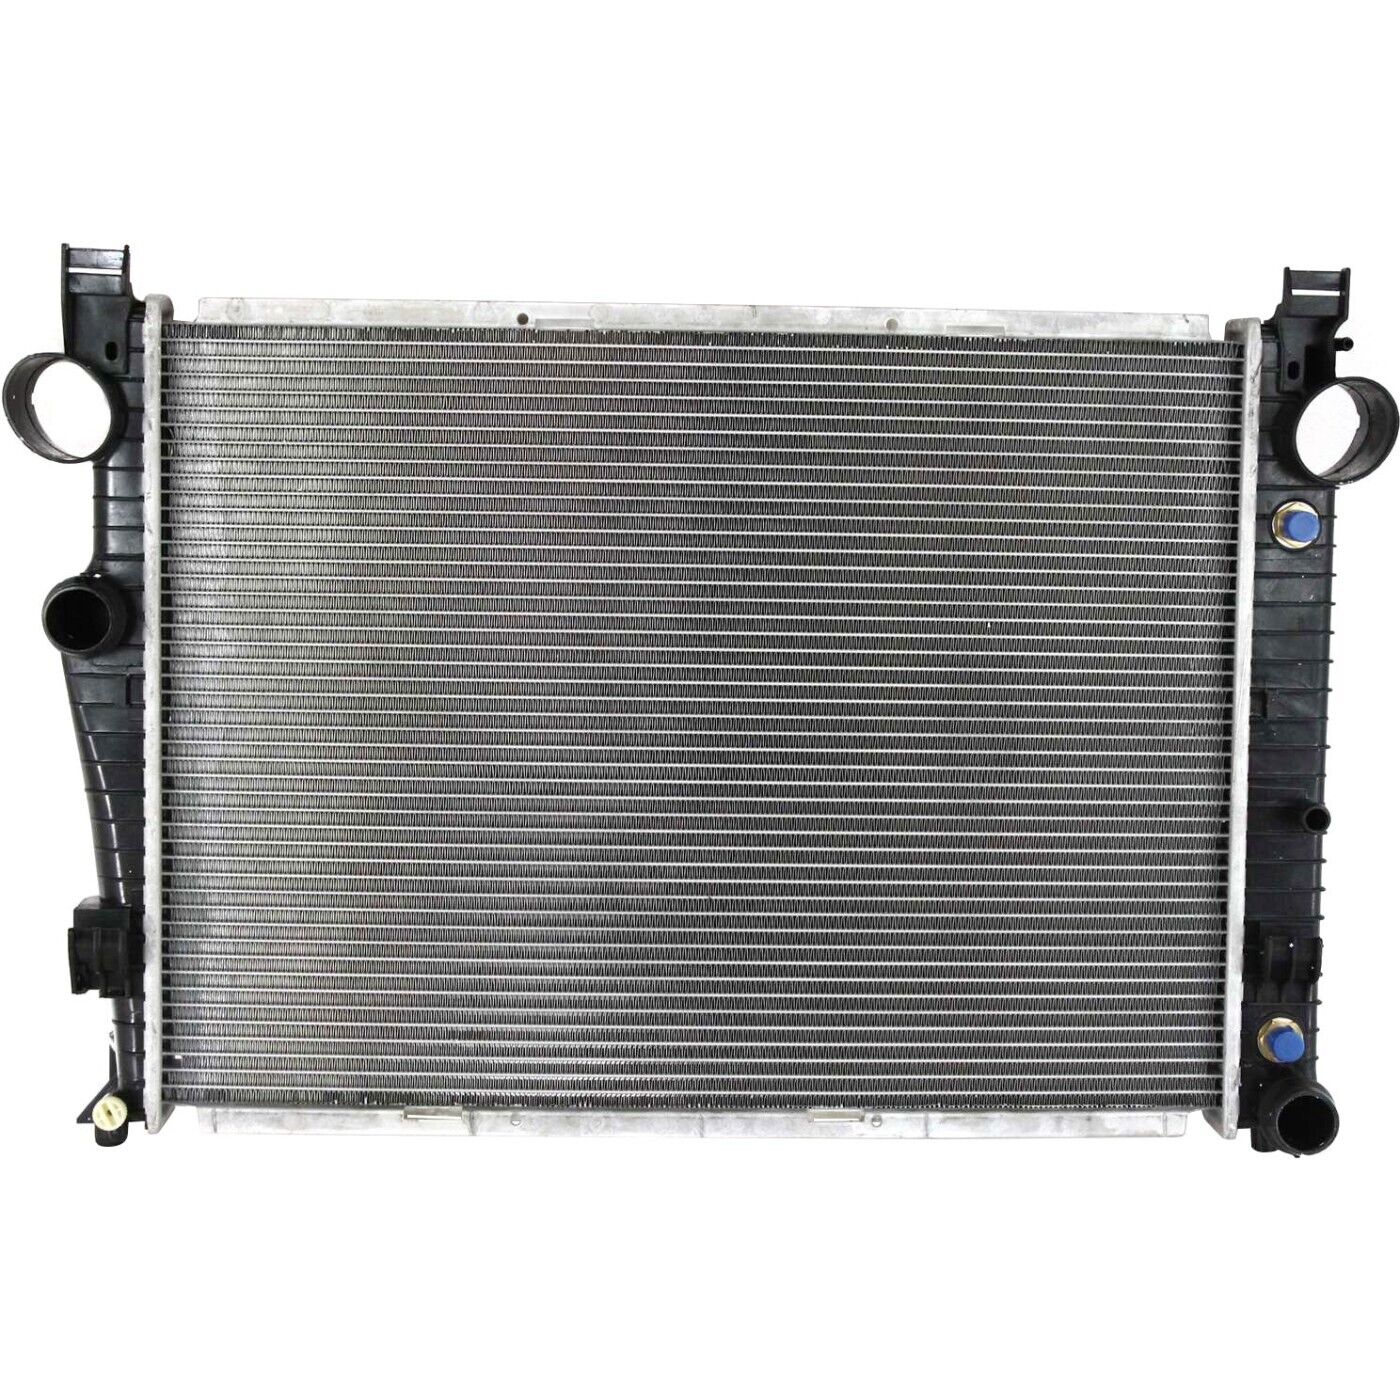 Radiator For Mercedes-Benz S500 CL500 S430 S55 AMG S600 5.0 4.3 5.5 5.8 2652